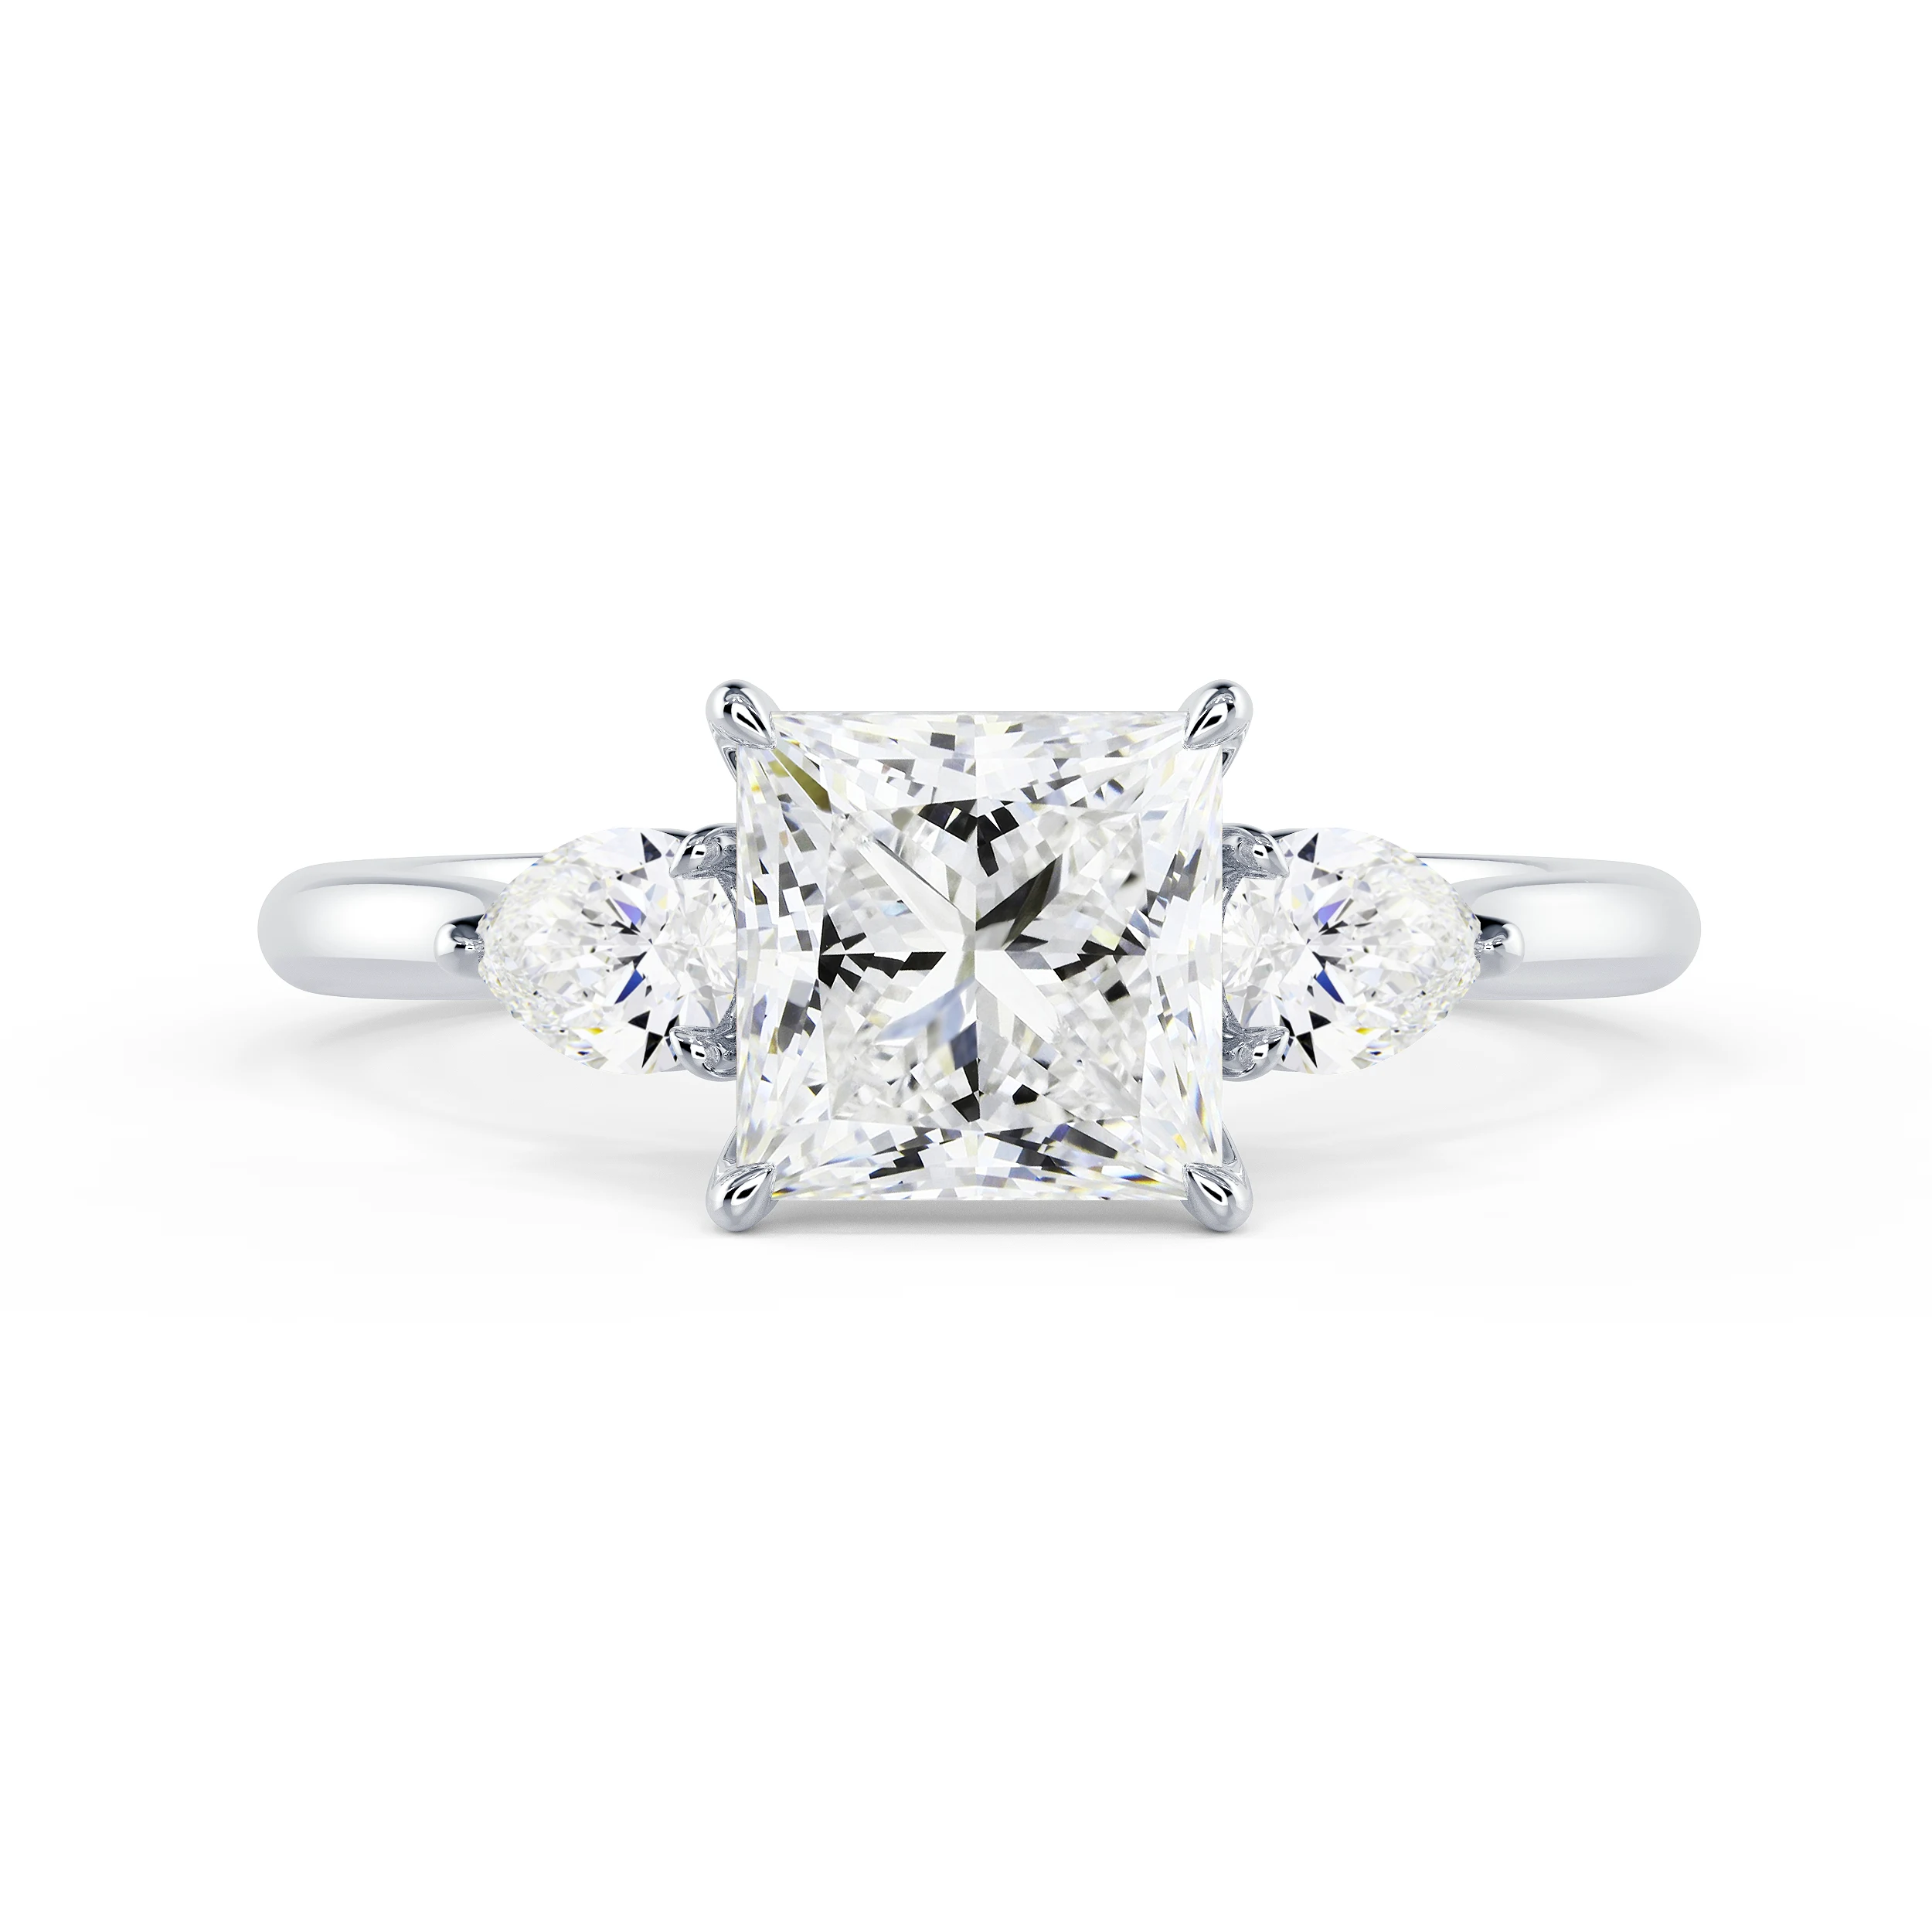 Lab Diamonds set in White Gold Princess and Pear Setting (Main View)